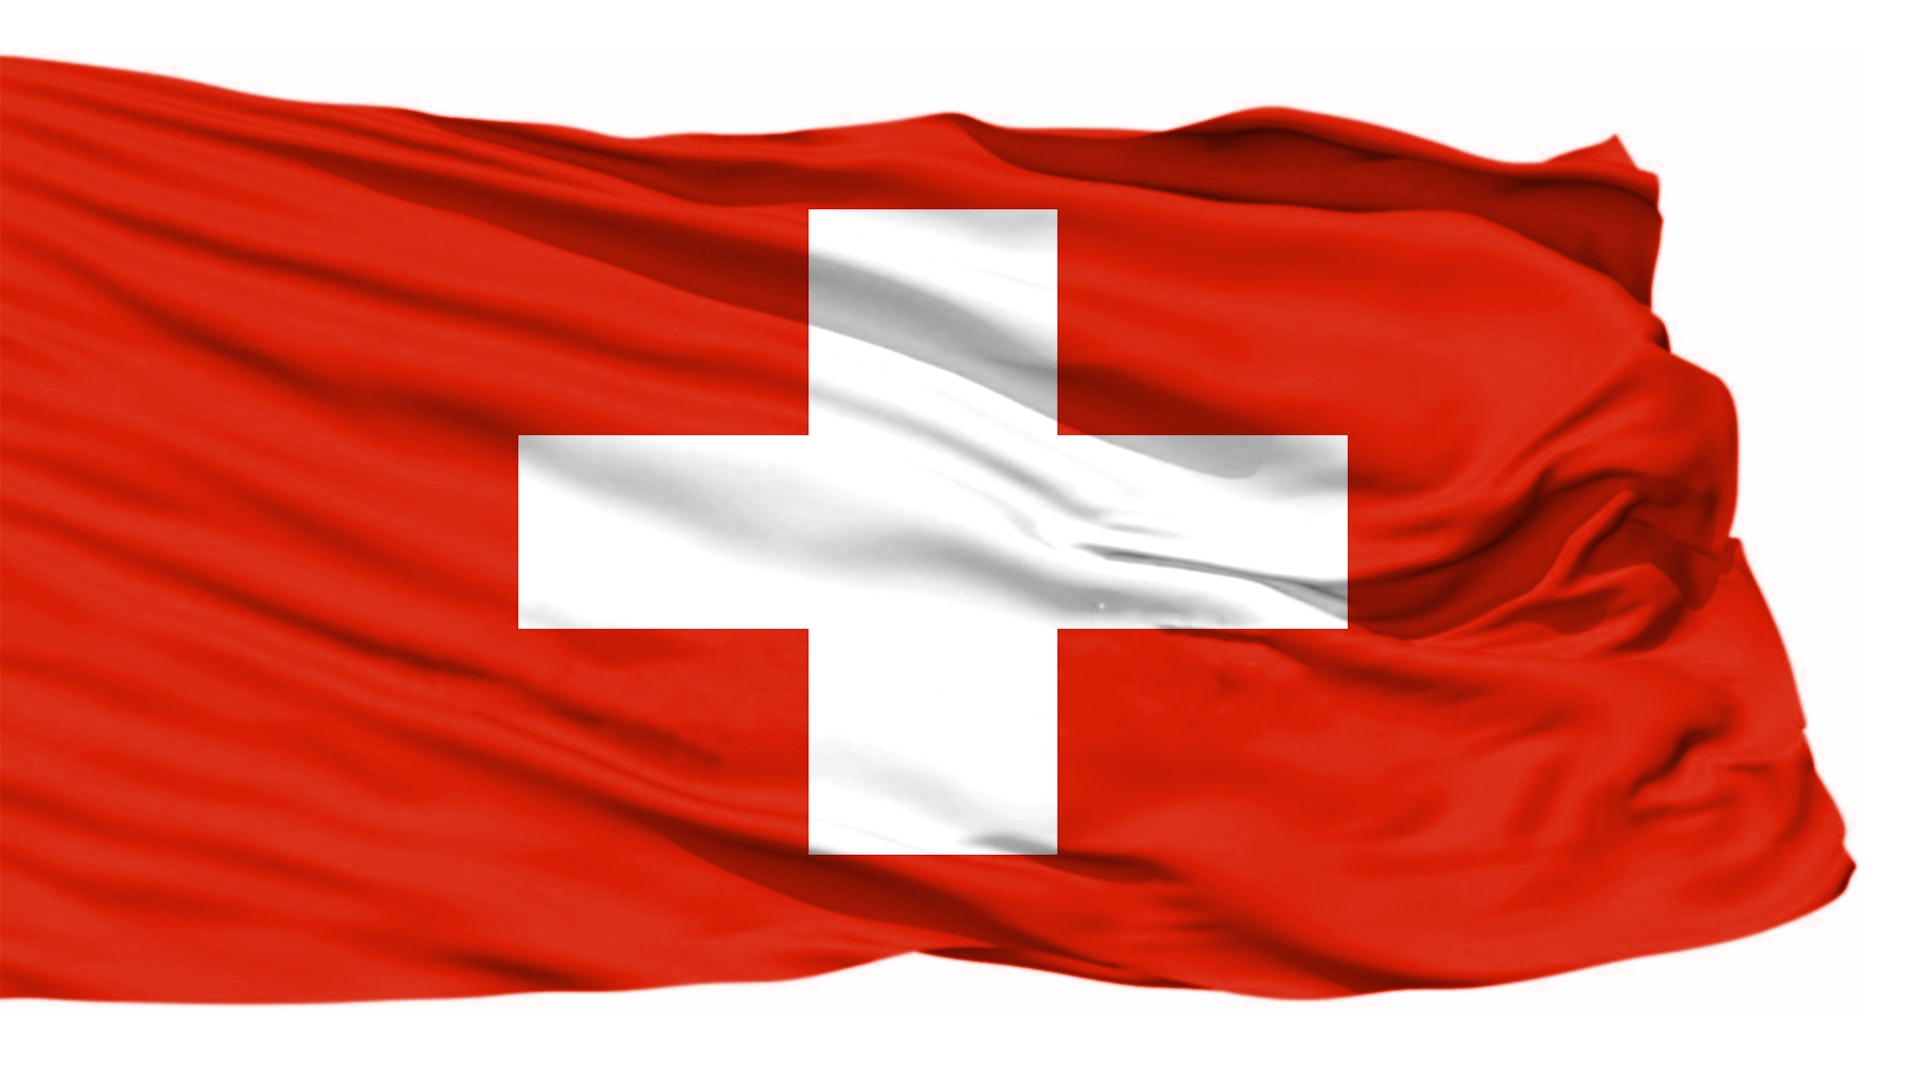 Swiss president elected on rotating one-year presidency